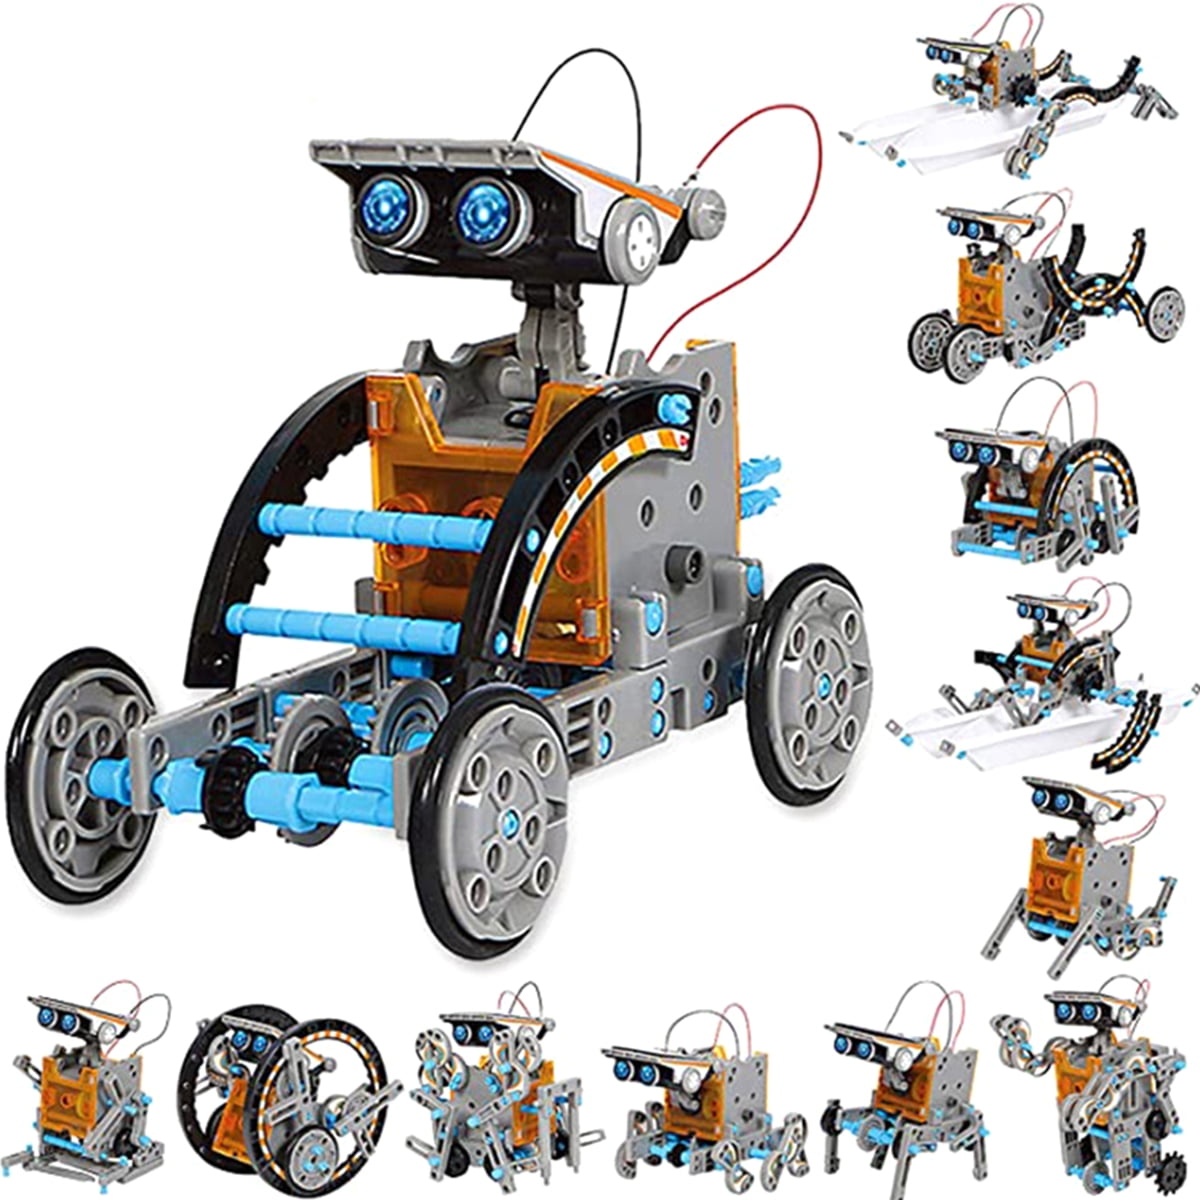 STEM Education DIY Solar Robot Toys Building Science Kits for Kids 12-in-1 gifts 